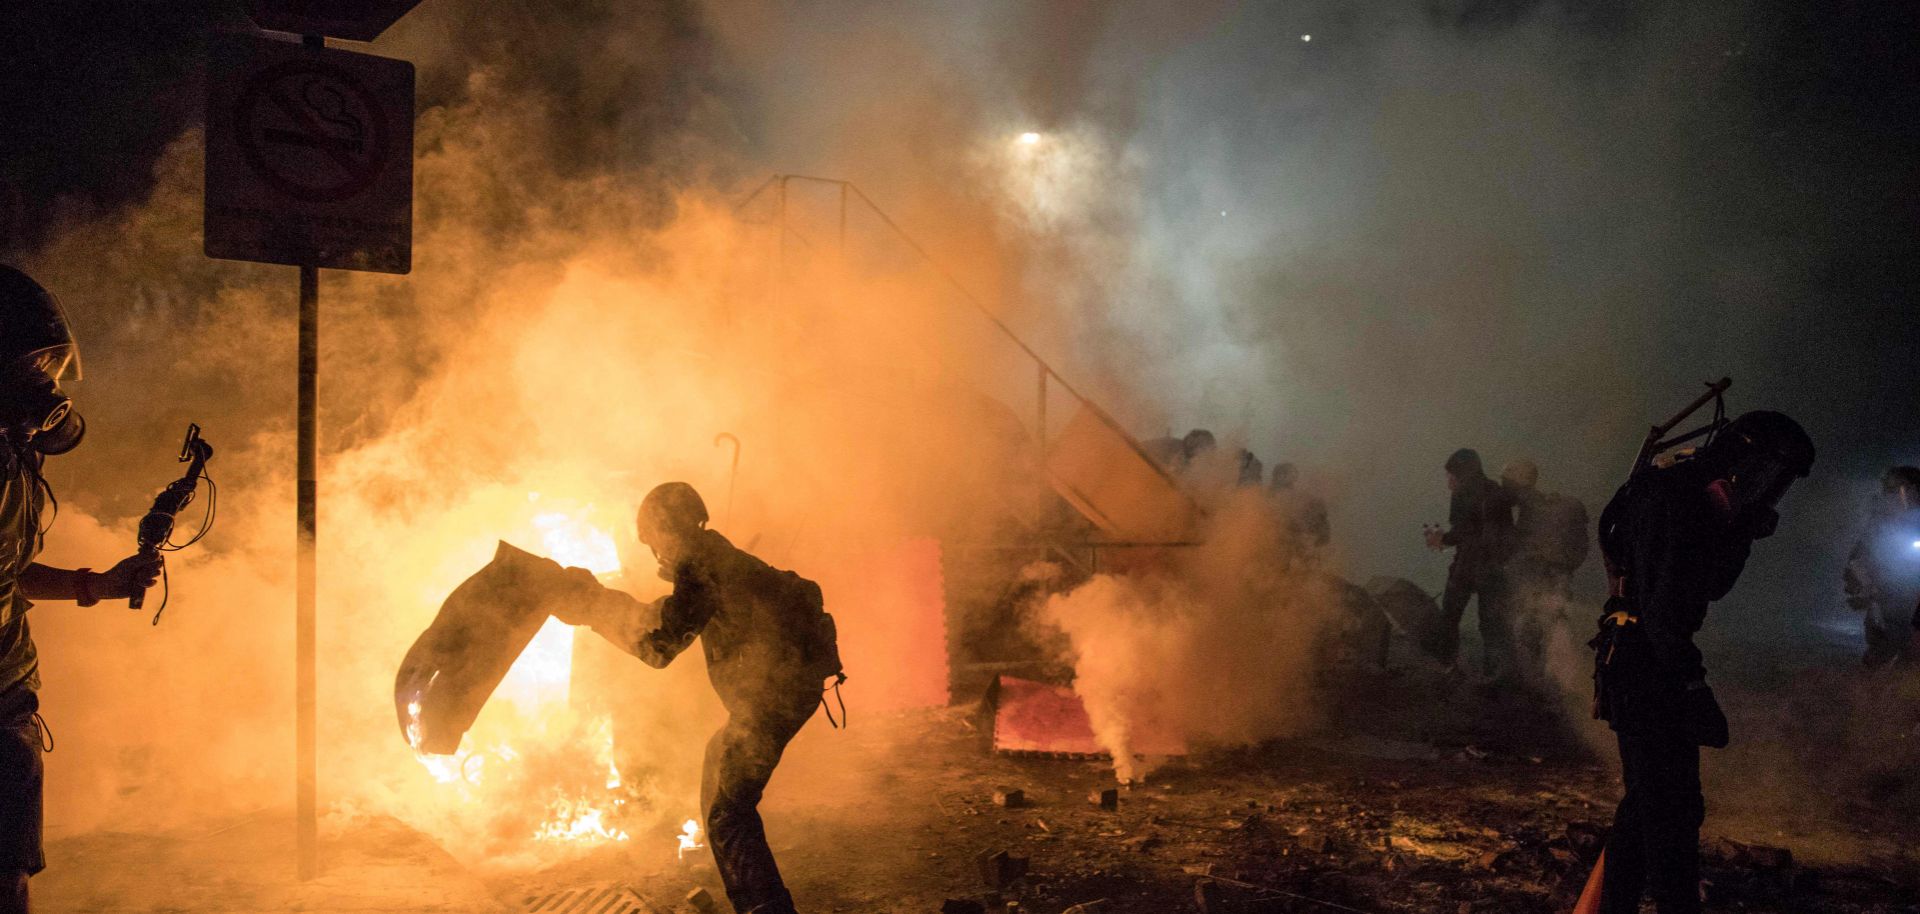 A barricade burns during clashes between protesters and police at the Chinese University of Hong Kong (CUHK) on November 12, 2019. Hong Kong pro-democracy protesters clashed with riot police in the city's upmarket business district and on university campuses, extending one of the most violent stretches of unrest seen in more than five months of political chaos in the city.